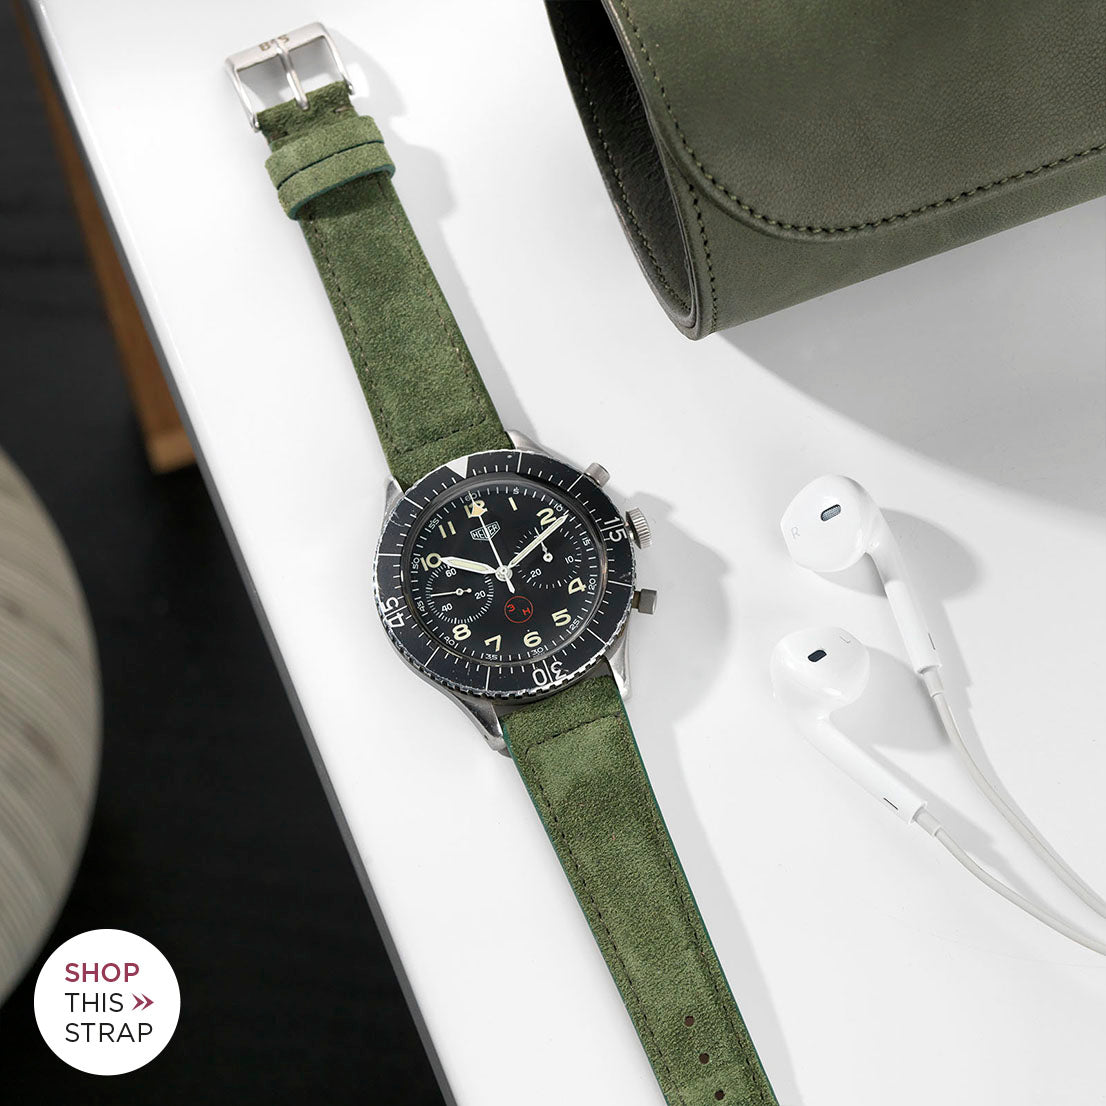 Bulang and Sons_Strap Guide _The Heuer Chronograph 3H German Airforce_Olive Drab Green Suede Leather Watch Strap